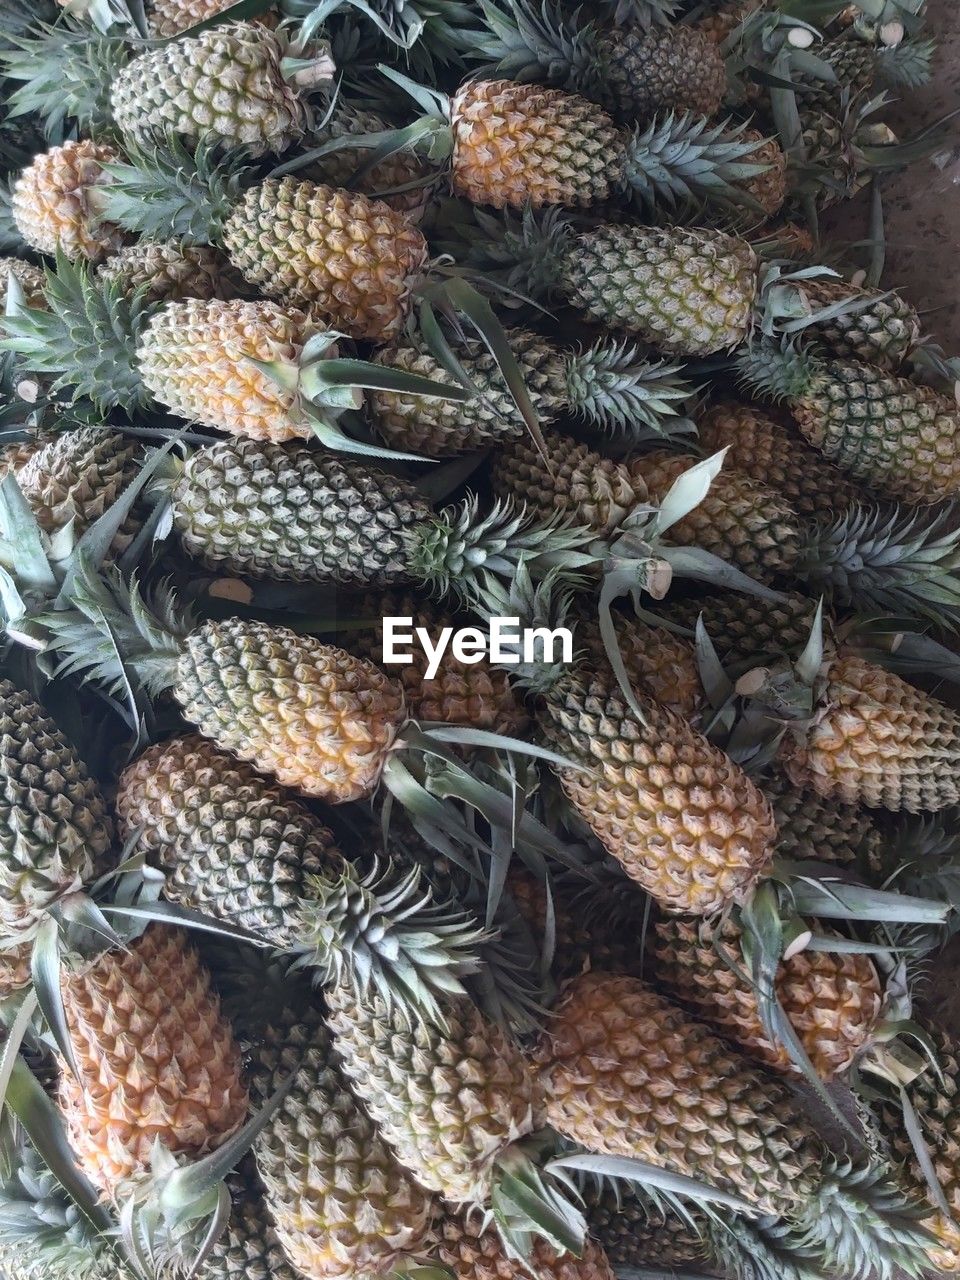 pineapple, food and drink, food, no people, plant, large group of objects, ananas, healthy eating, produce, conifer cone, freshness, wellbeing, abundance, full frame, fruit, day, market, backgrounds, high angle view, for sale, retail, tropical fruit, nature, outdoors, close-up